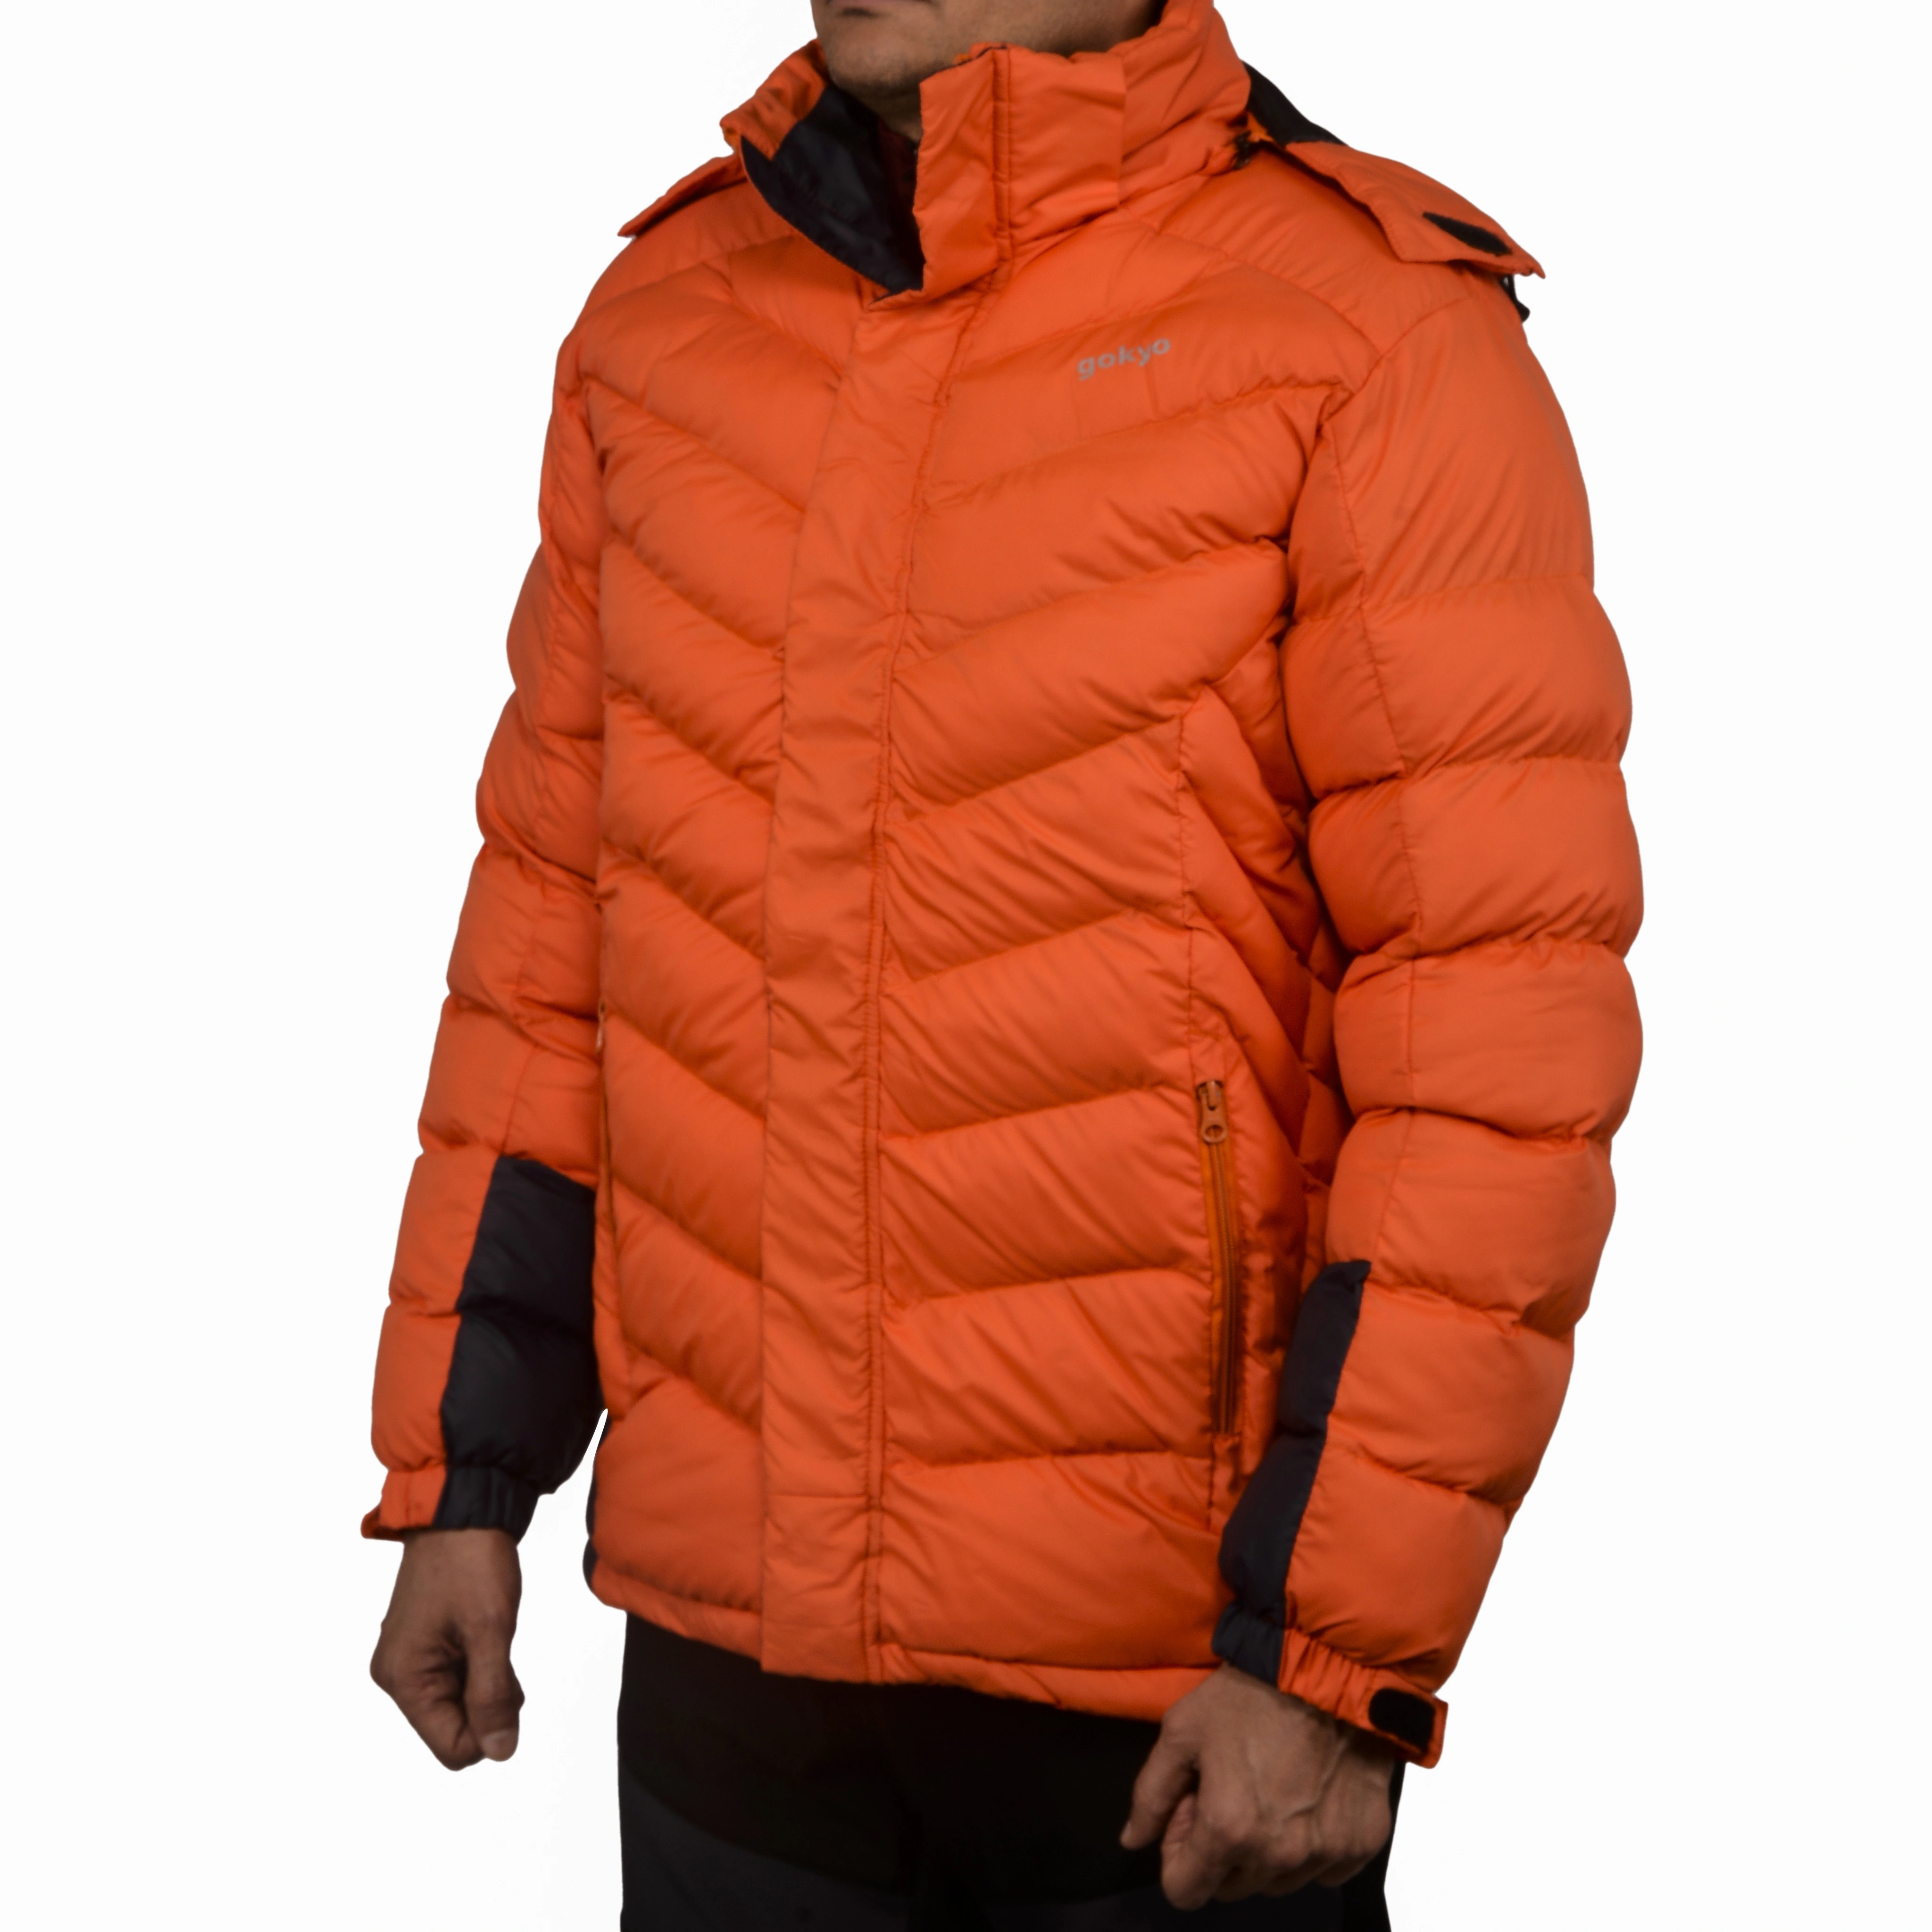 K2 Survivor Down Jacket for Men: Stylized Functionality for Extreme Cold Weather Expeditions (Up to -20°C)-XL-Orange-2